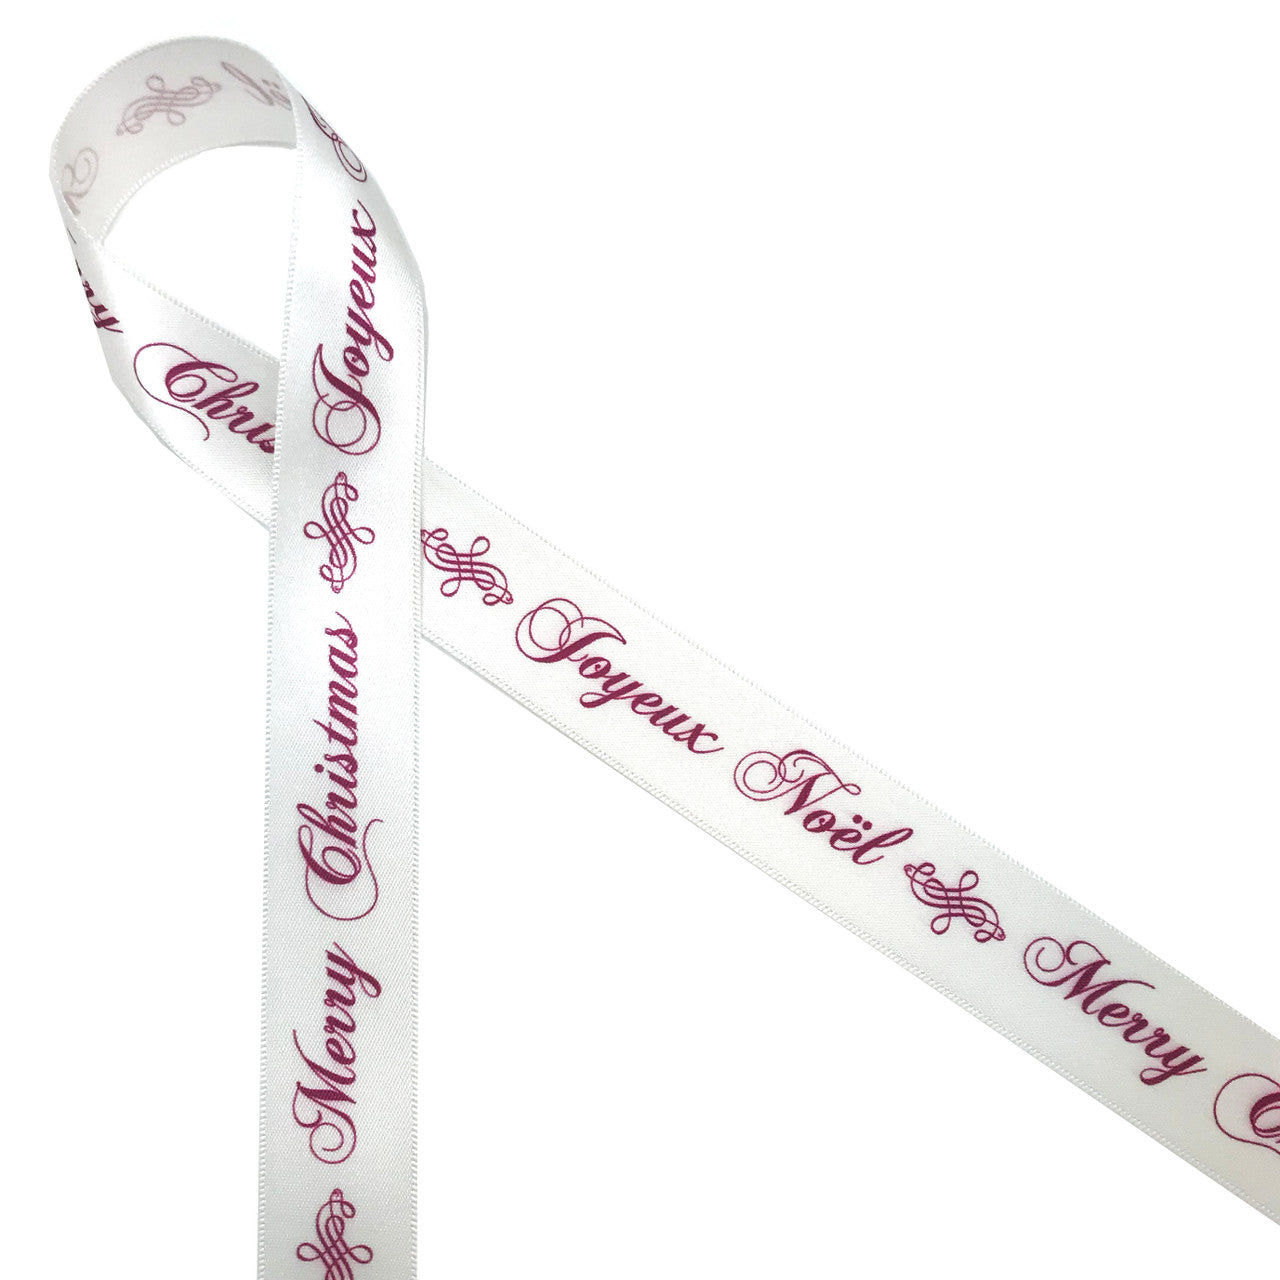 Joyeux Noel and Merry Christmas in ruby red on 7/8" Antique White Single face satin ribbon, 10 Yards